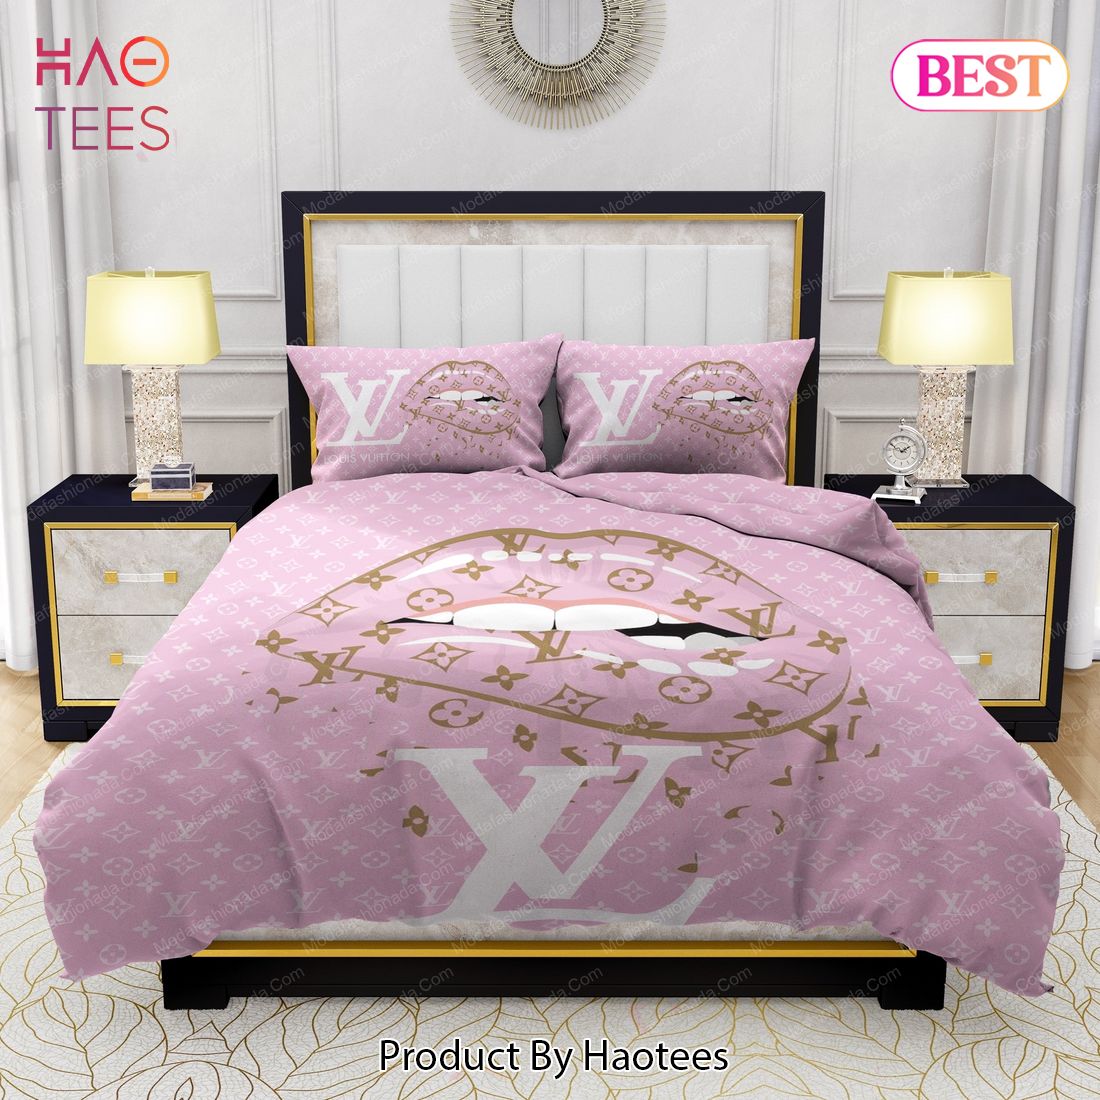 Lips With Louis Vuitton Pattern Bedding Sets Bed Sets, Bedroom